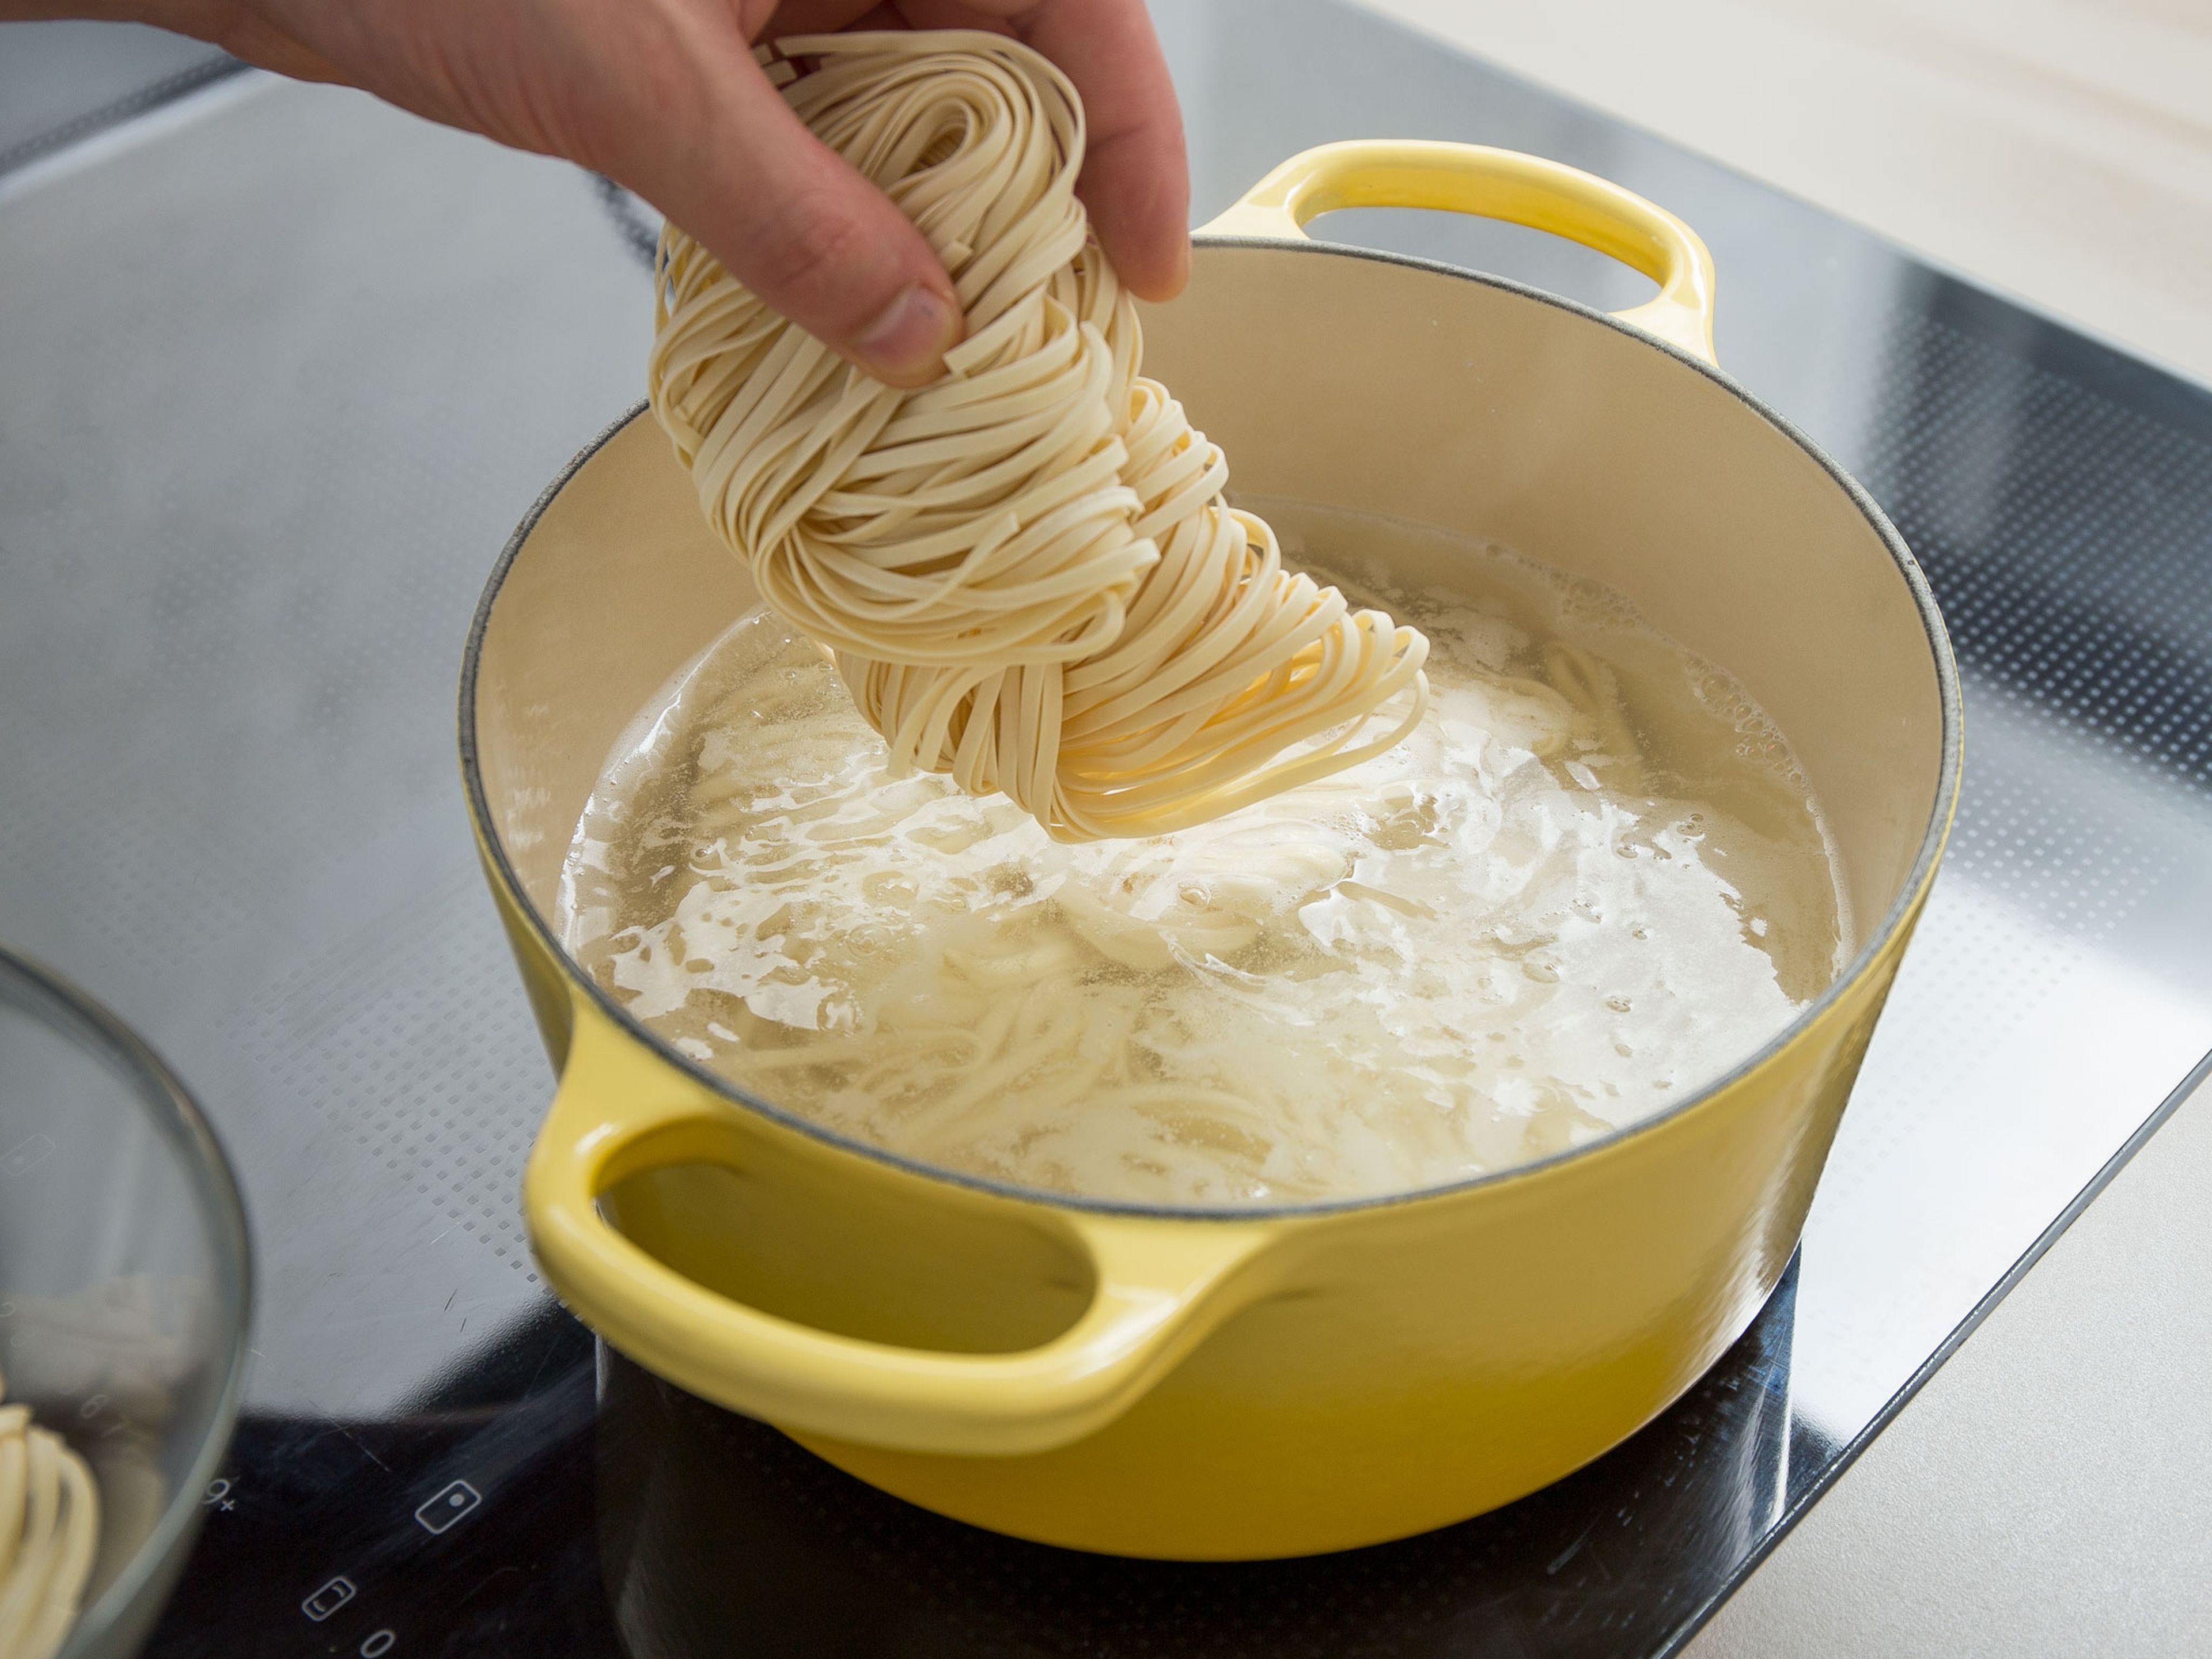 Add water to a large saucepan and bring to a boil. Add egg noodles and cook for approx. 6 – 8 min., or until al dente. Drain and set aside in a bowl with cold water.